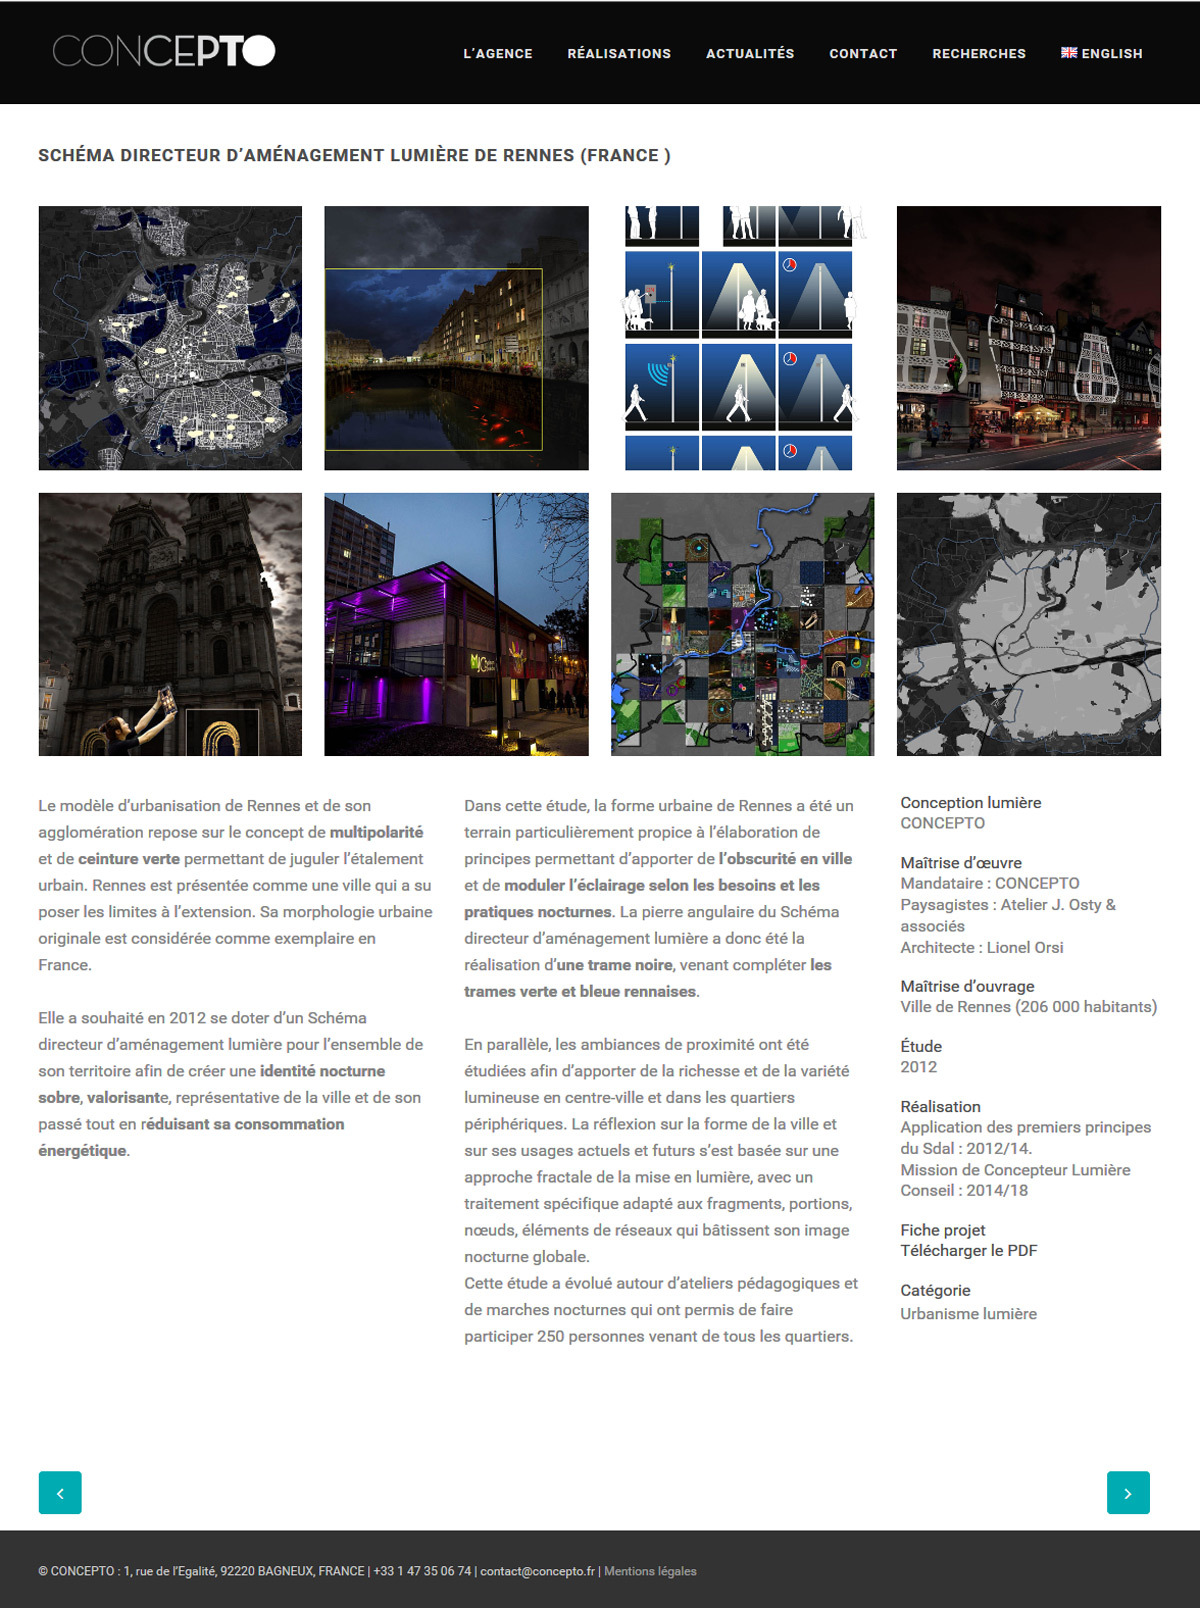 Site-Web-Concepto-Realisations-Sdal-Rennes-2015-©-Concepto